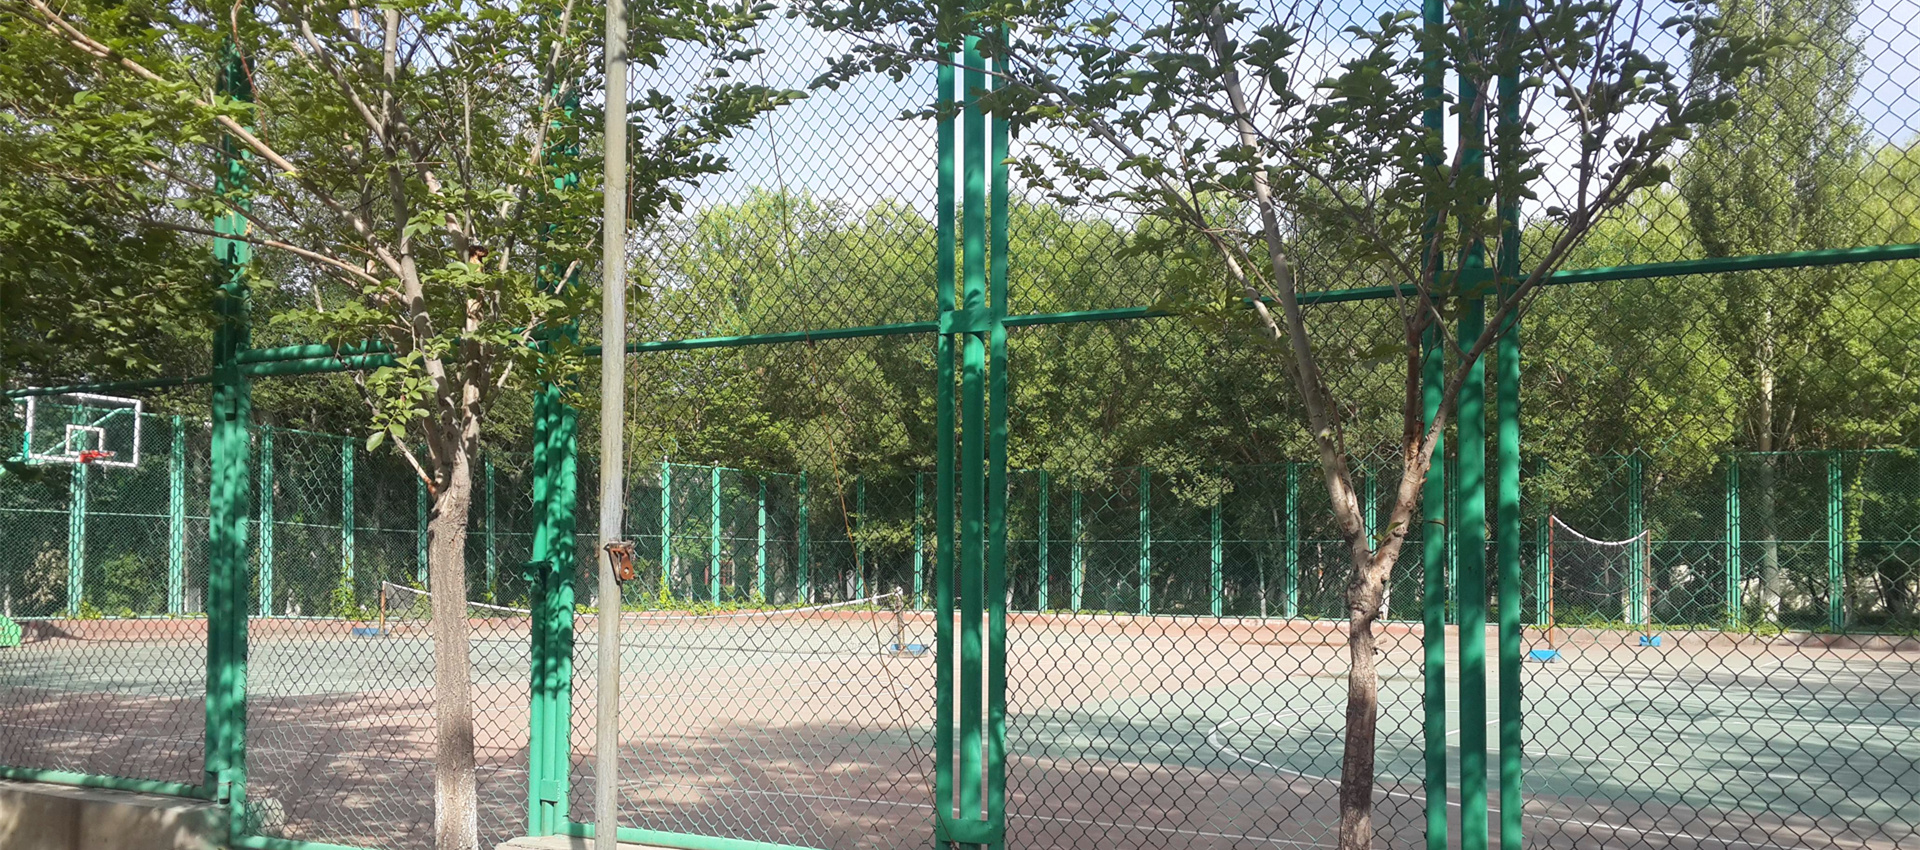 court perimeter chain link fence